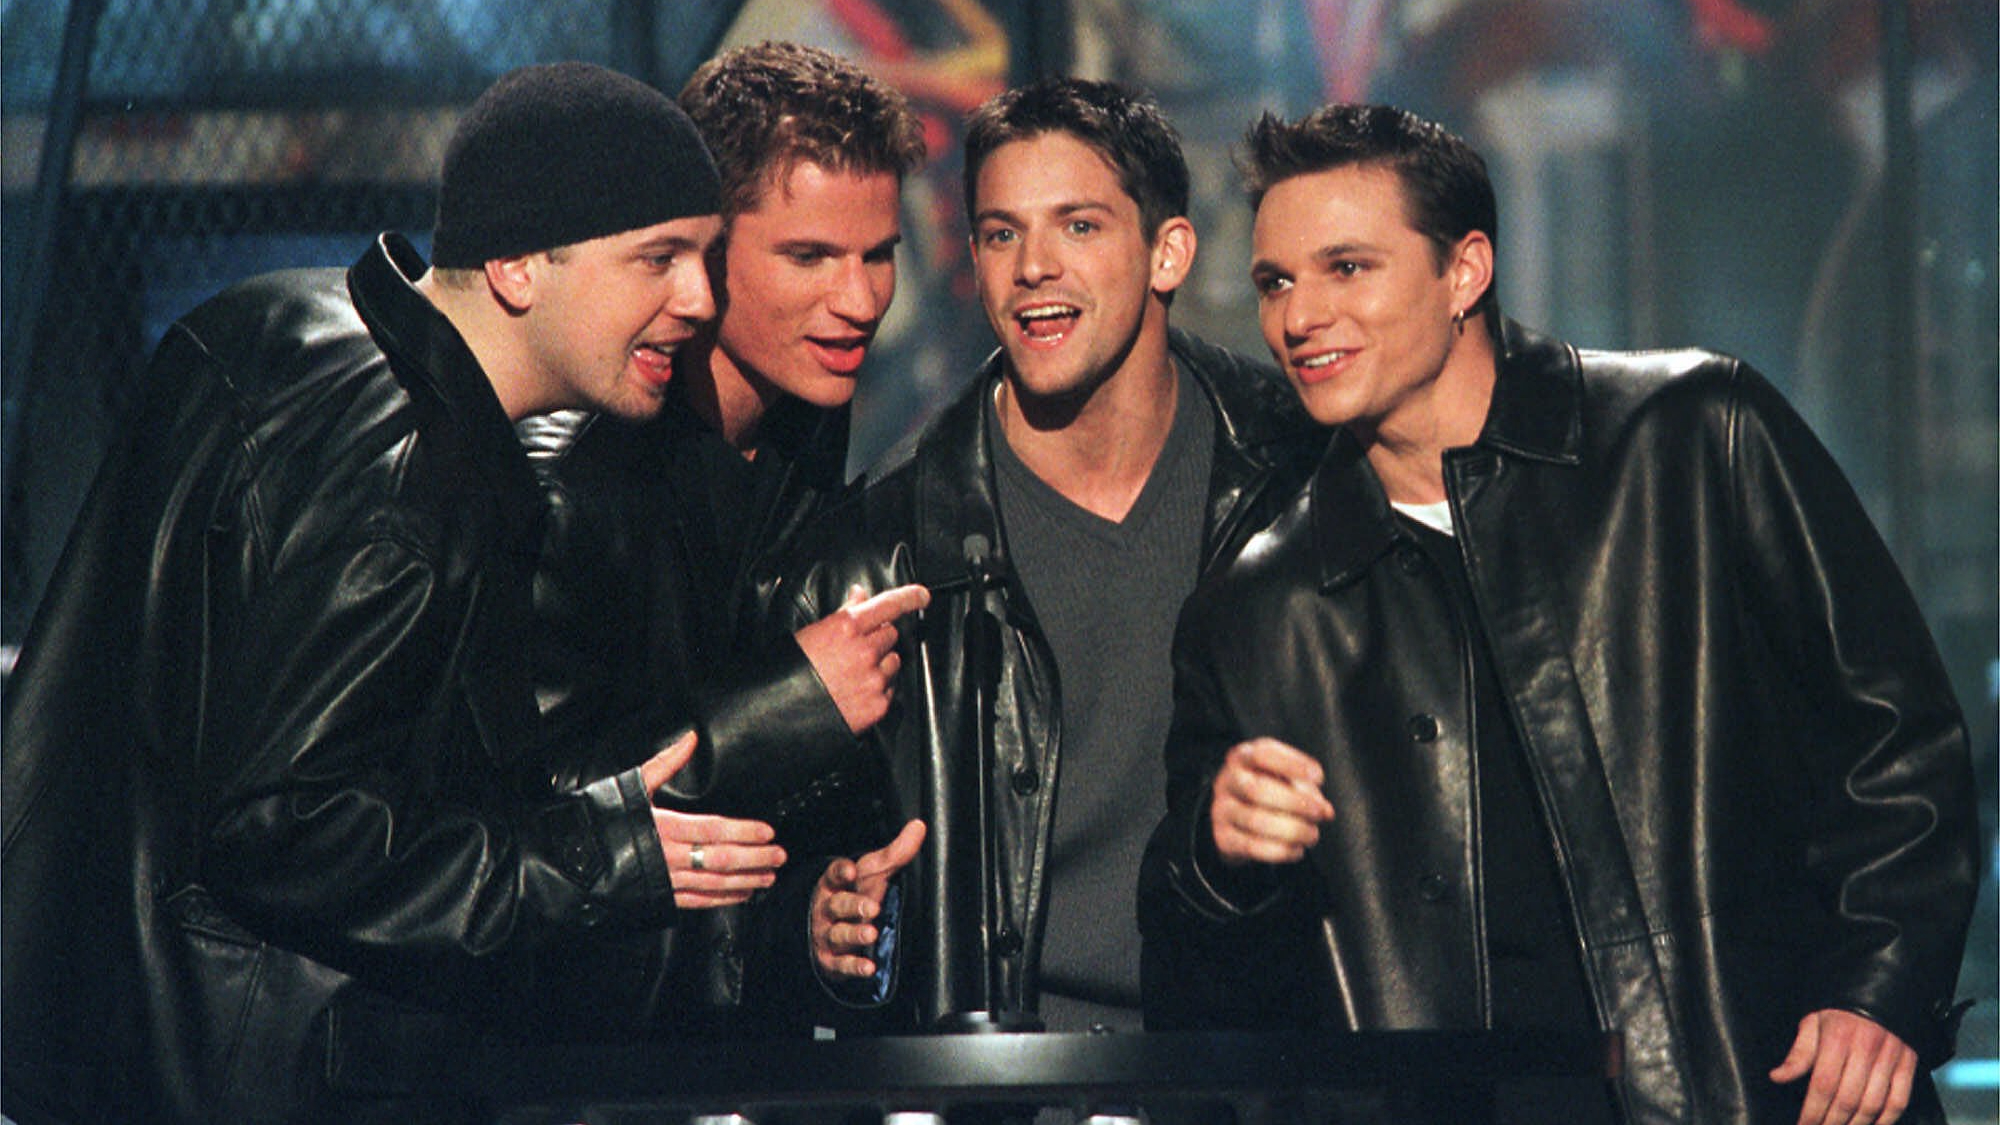 Iconic boy band 98 Degrees coming to Schenectady's Rivers Casino